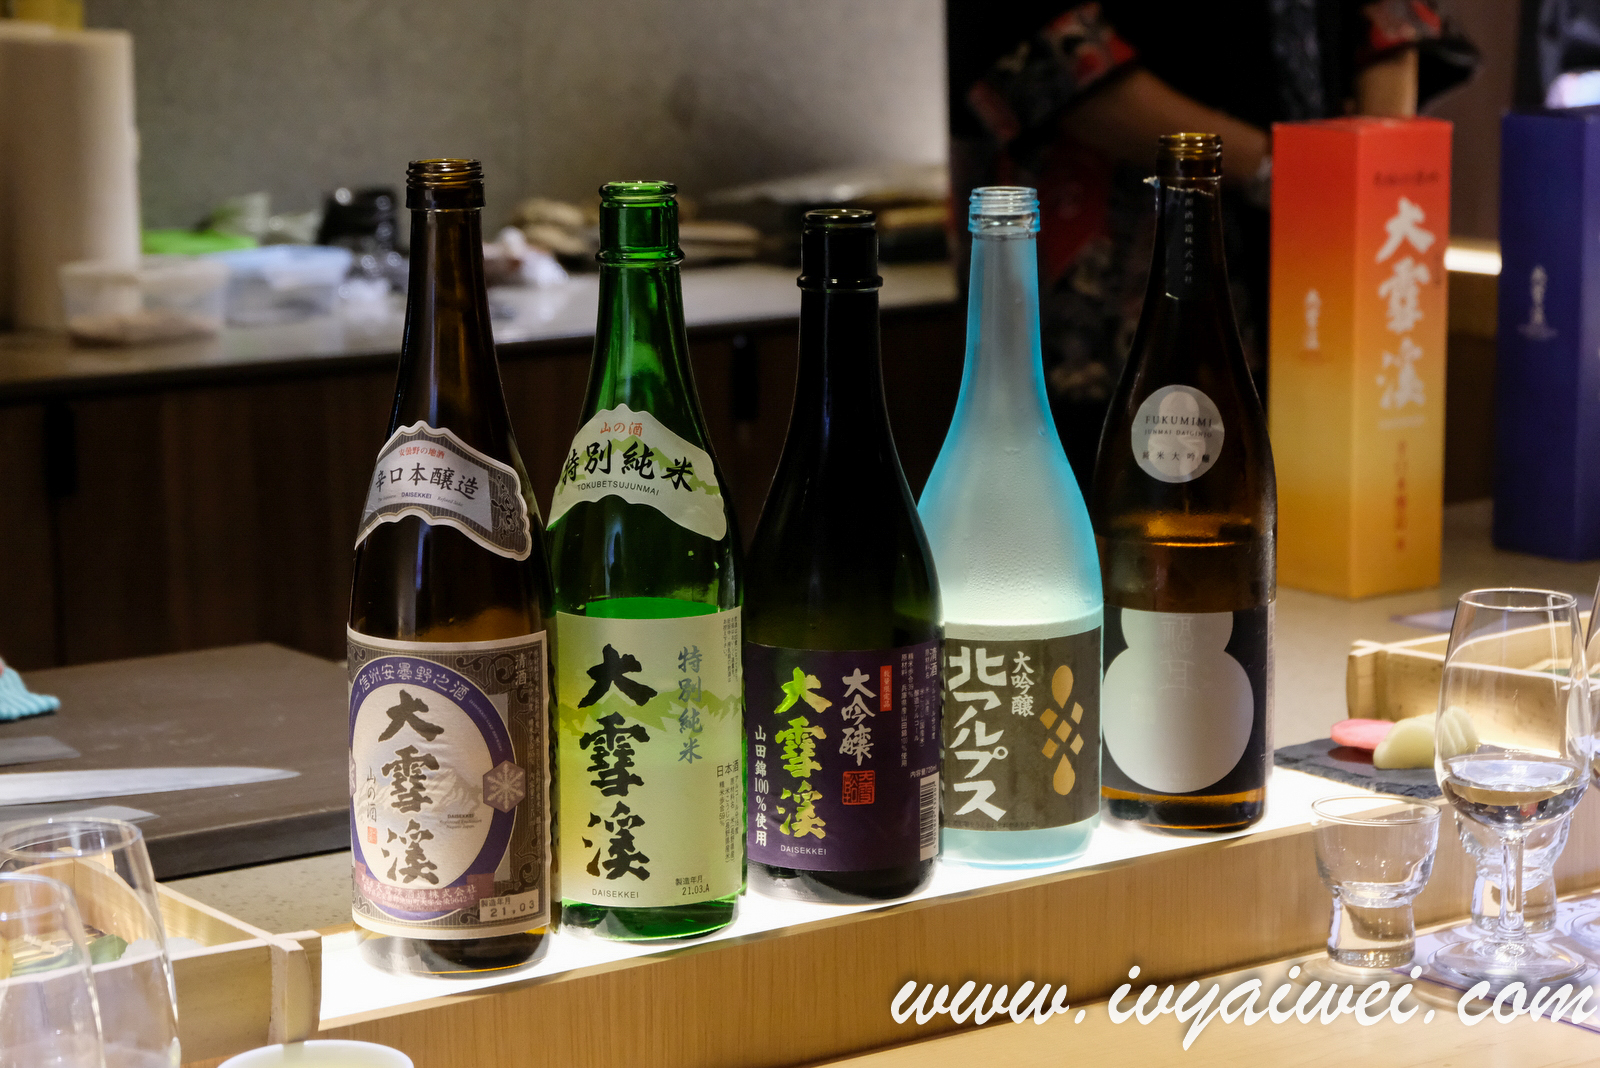 A Journey of Aroma and Taste with Ikeda Town’s beauties：Sake from Daisekkei Sake Brewery and Fukugen Shuzo